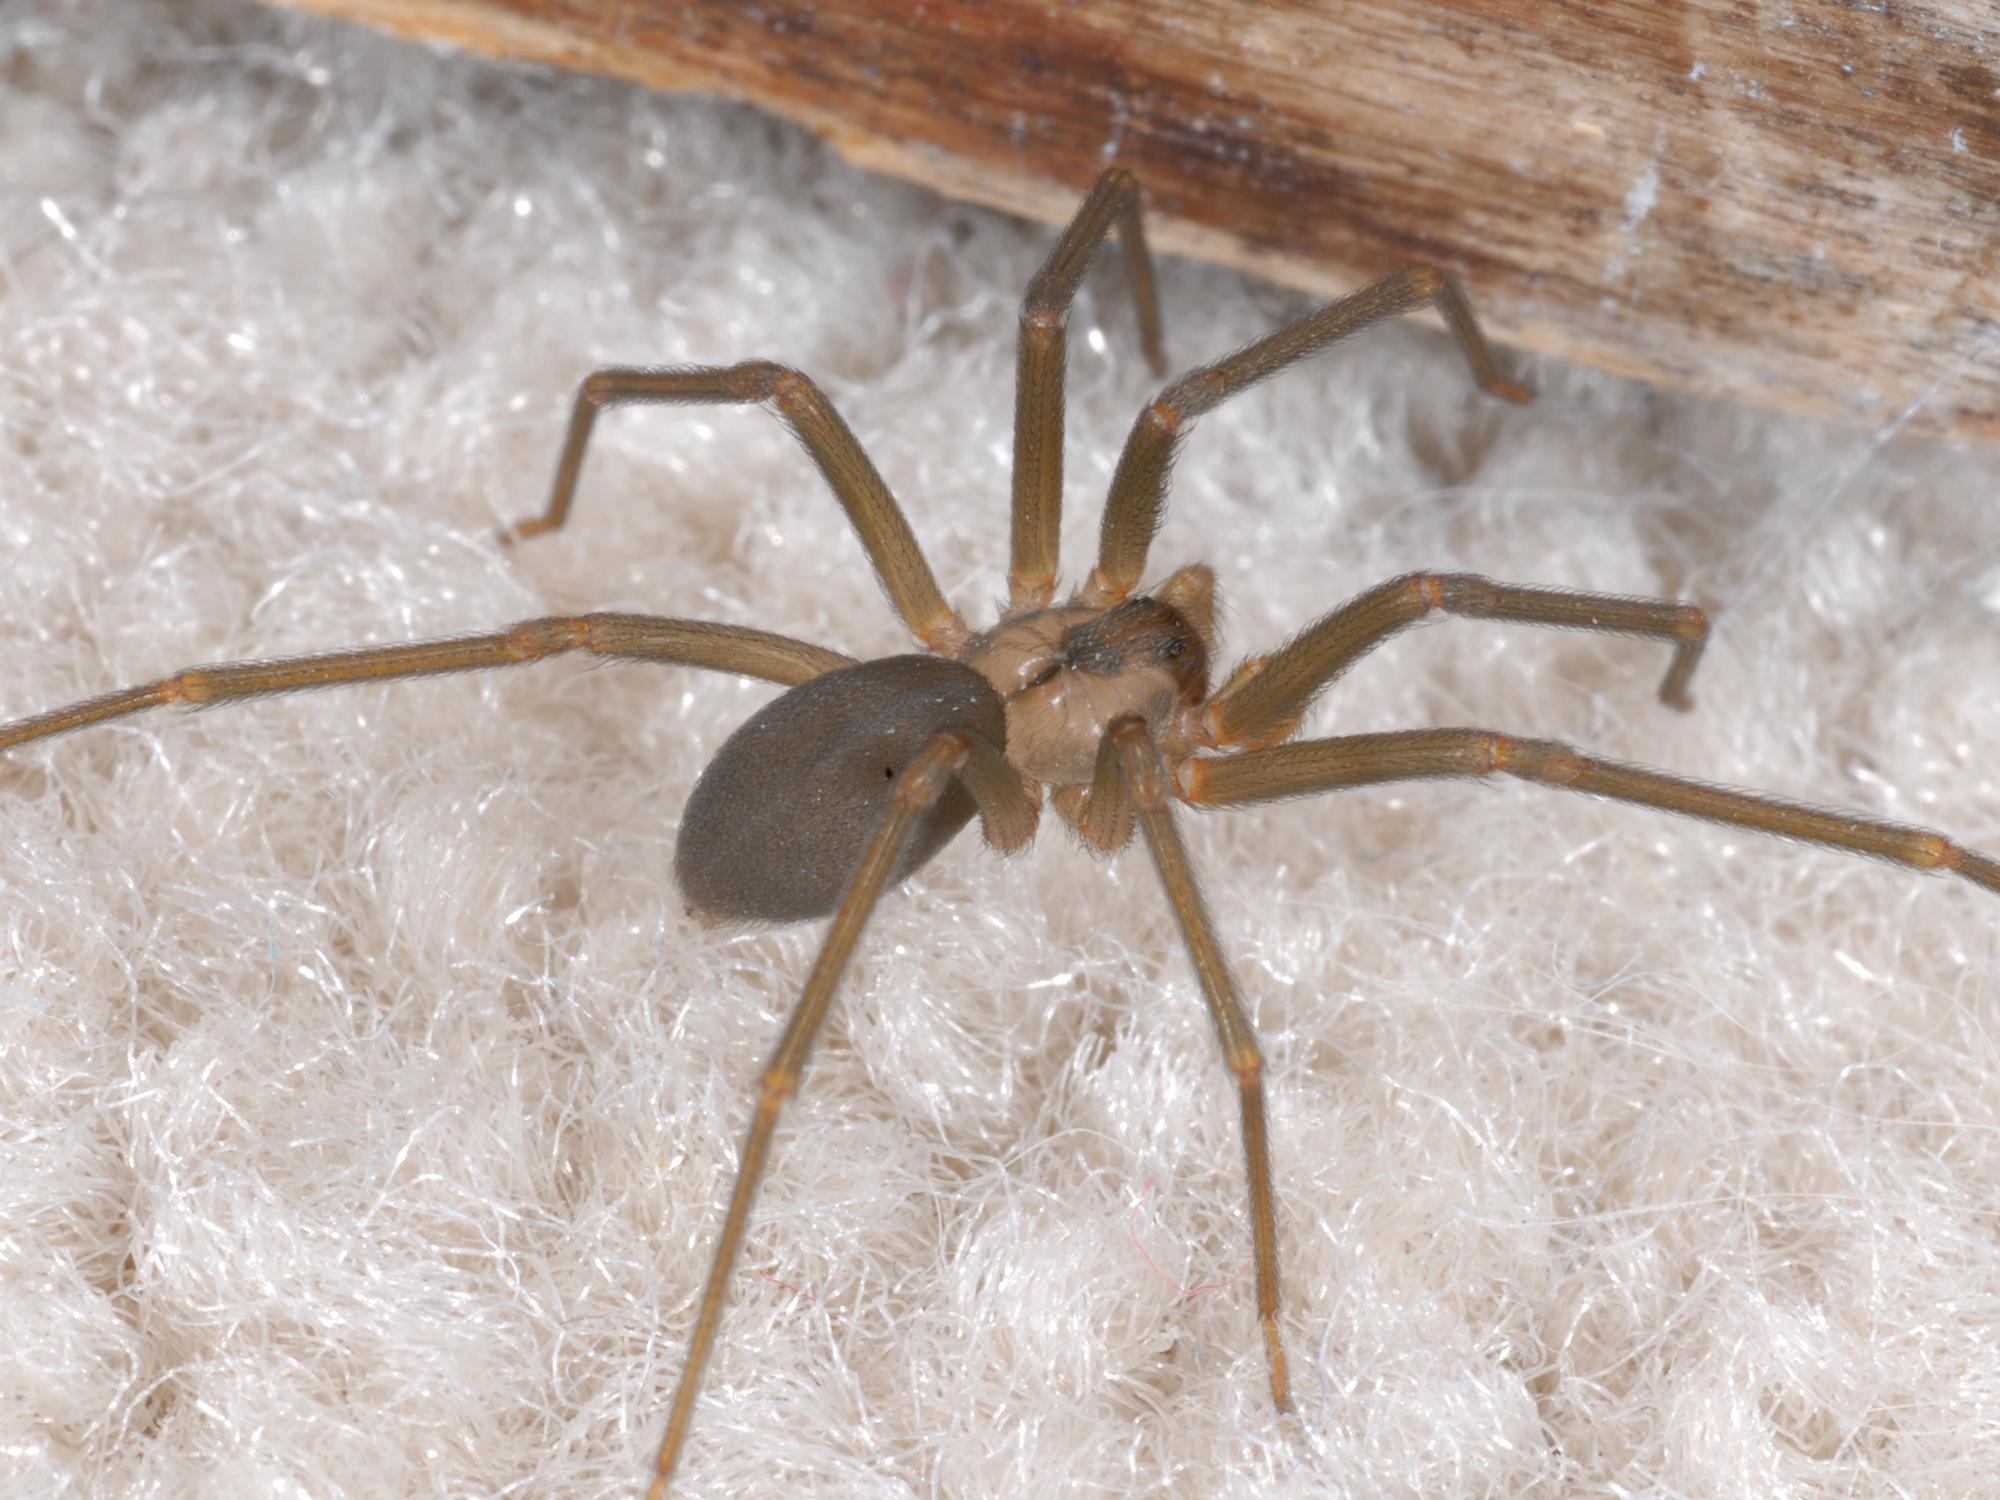 The dark, fiddle-shaped pattern on the back of the brown recluse helps distinguish it from other spiders. Because of their reclusive nature, watch out for these venomous spiders in dark, neglected areas. (Photo by MSU Extension Service/Blake Layton)